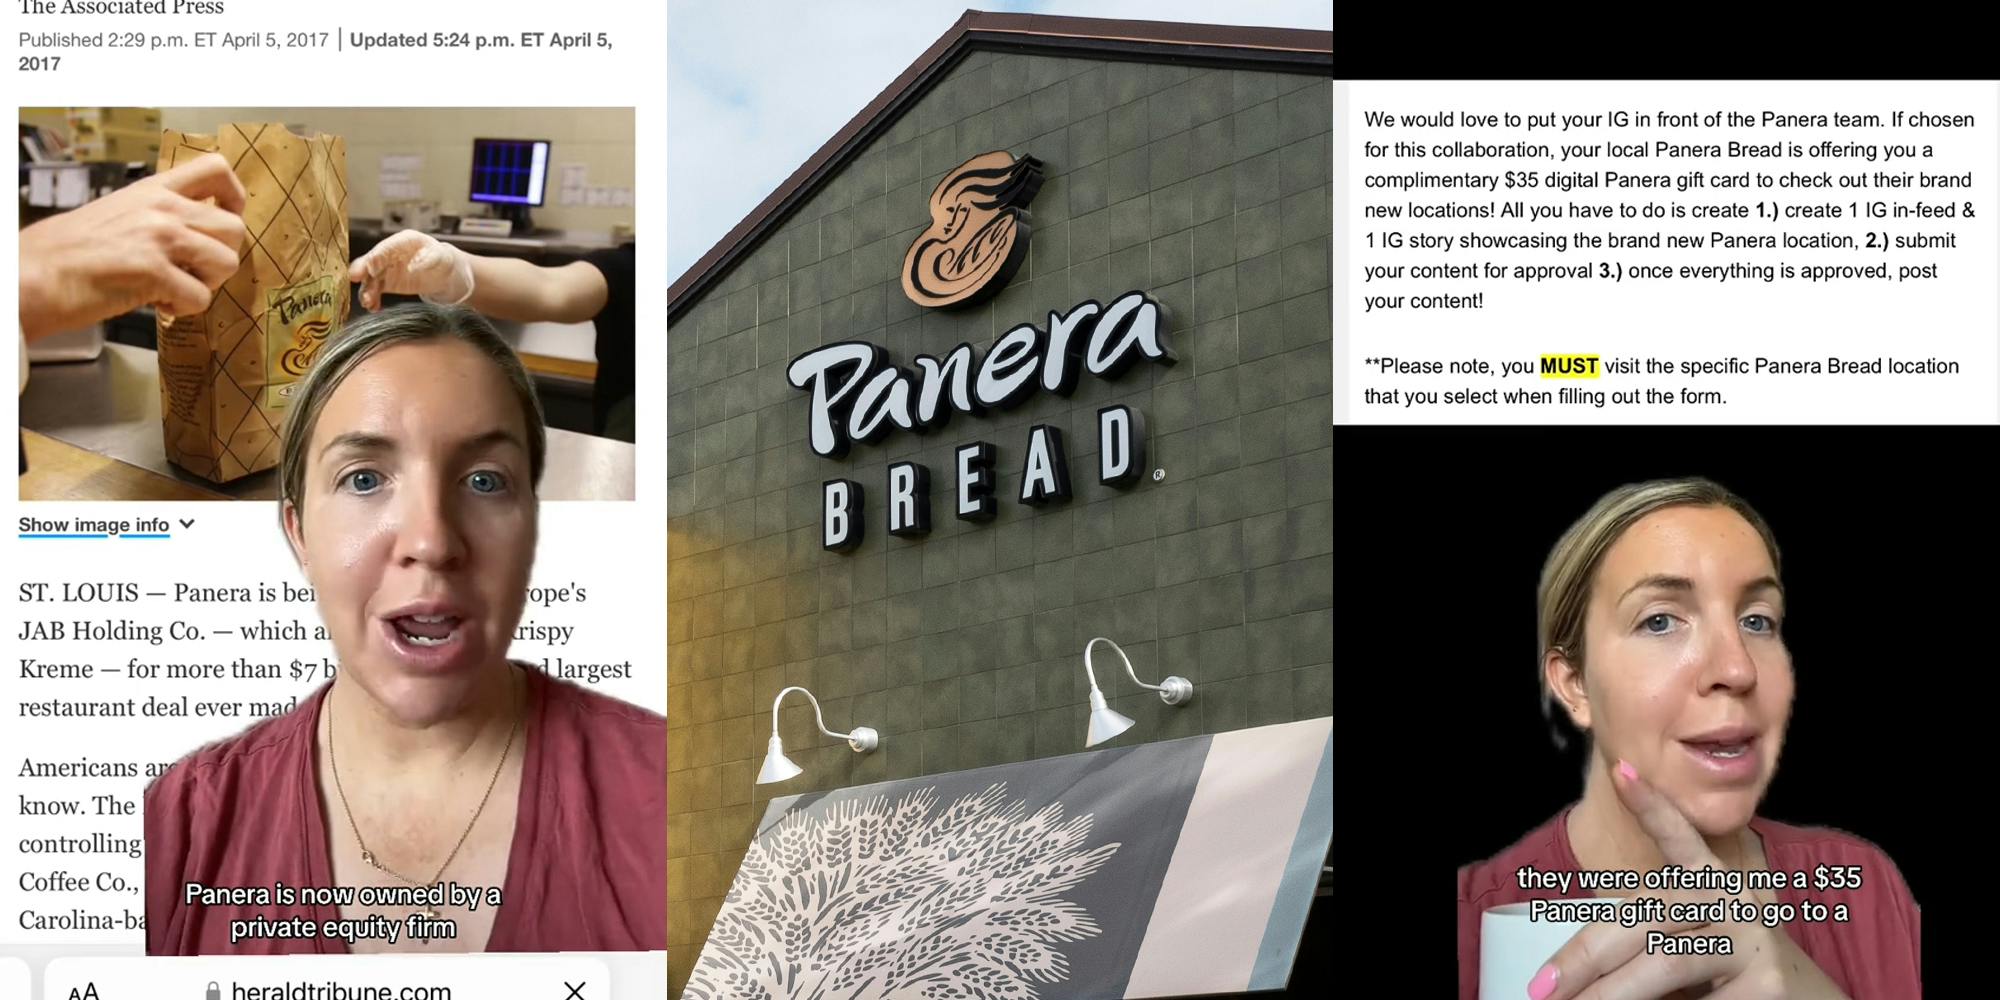 TikToker greenscreen TikTok over Panera article with caption "Panera is now owned by a private equity firm" (l) Panera Bread building with sign (c) TikToker greenscreen TikTok over email with caption "they were offering me a $35 Panera gift card to go to a Panera" (r)